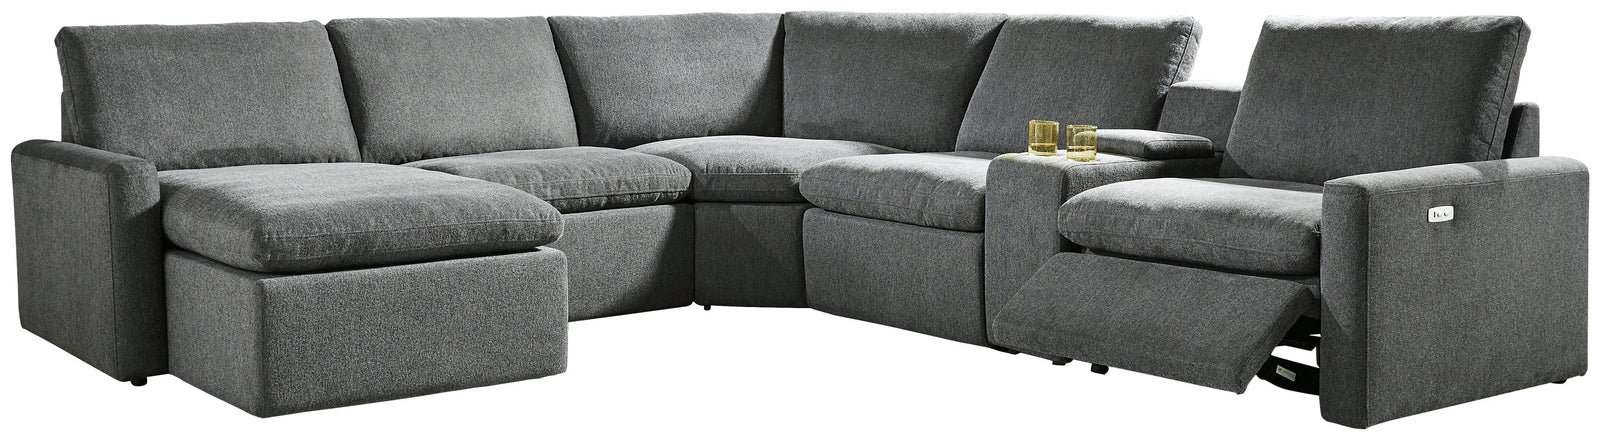 Hartsdale Granite 6-Piece Left Arm Facing Reclining Sectional With Console And Chaise - Ella Furniture